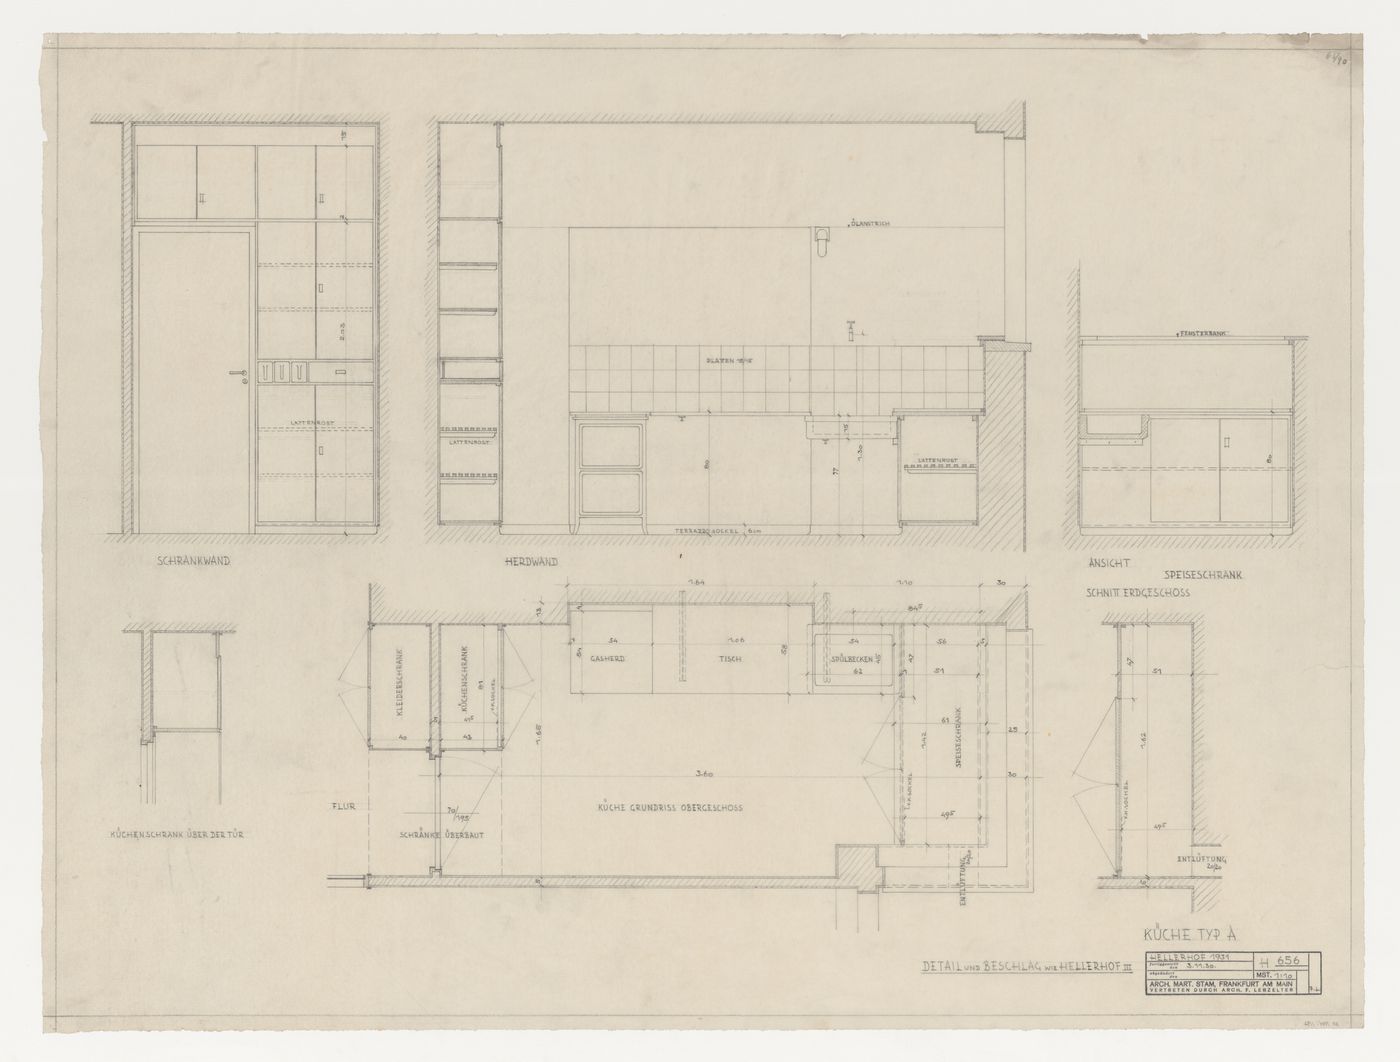 Plan, elevations, and sections for a type A kitchen for a housing unit, Hellerhof Housing Estate, Frankfurt am Main, Germany